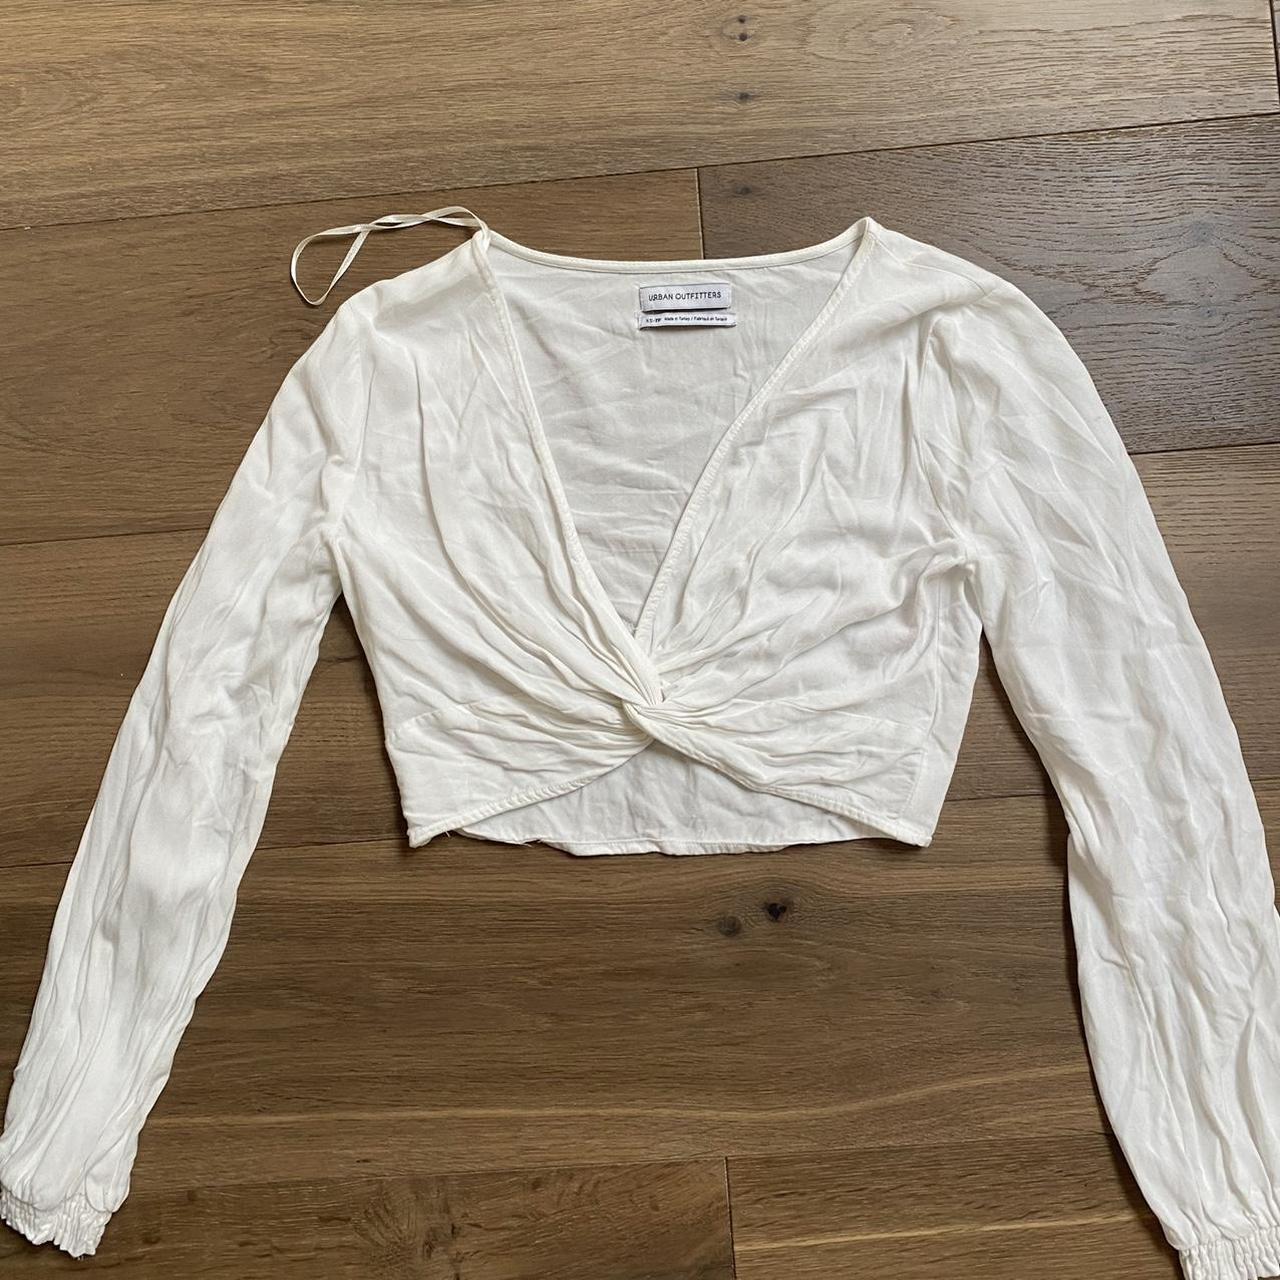 urban outfitters white top size XS PM me if you have... - Depop